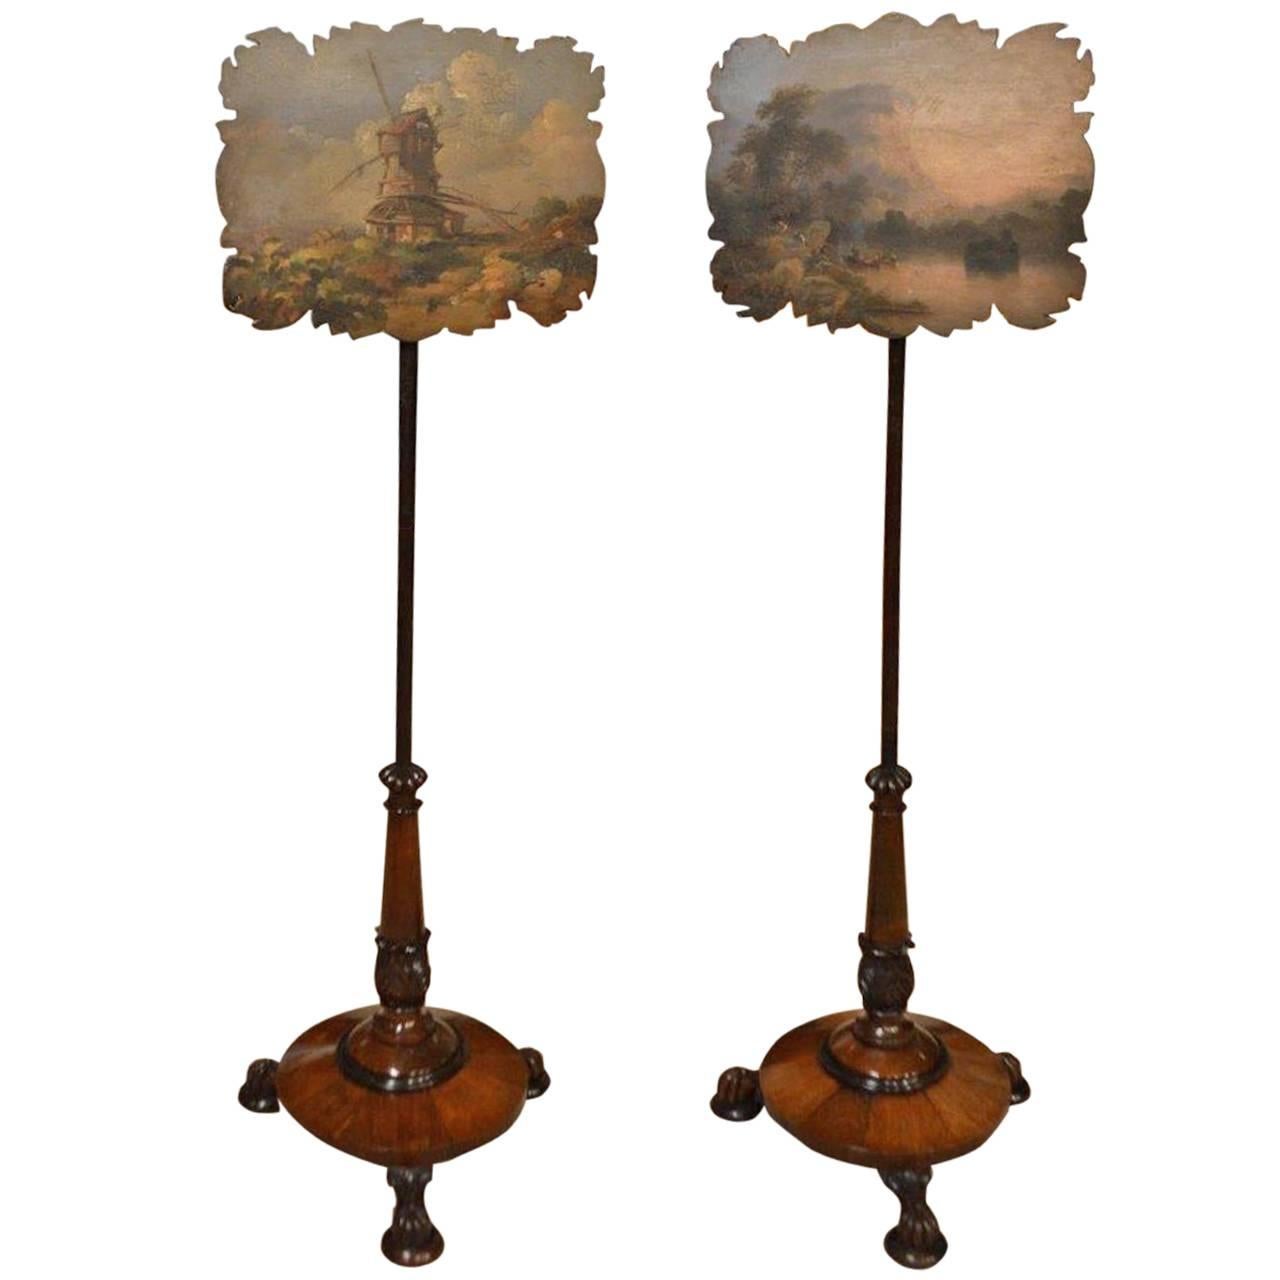 Charming Pair of Rosewood Early Victorian Period Antique Pole Screens